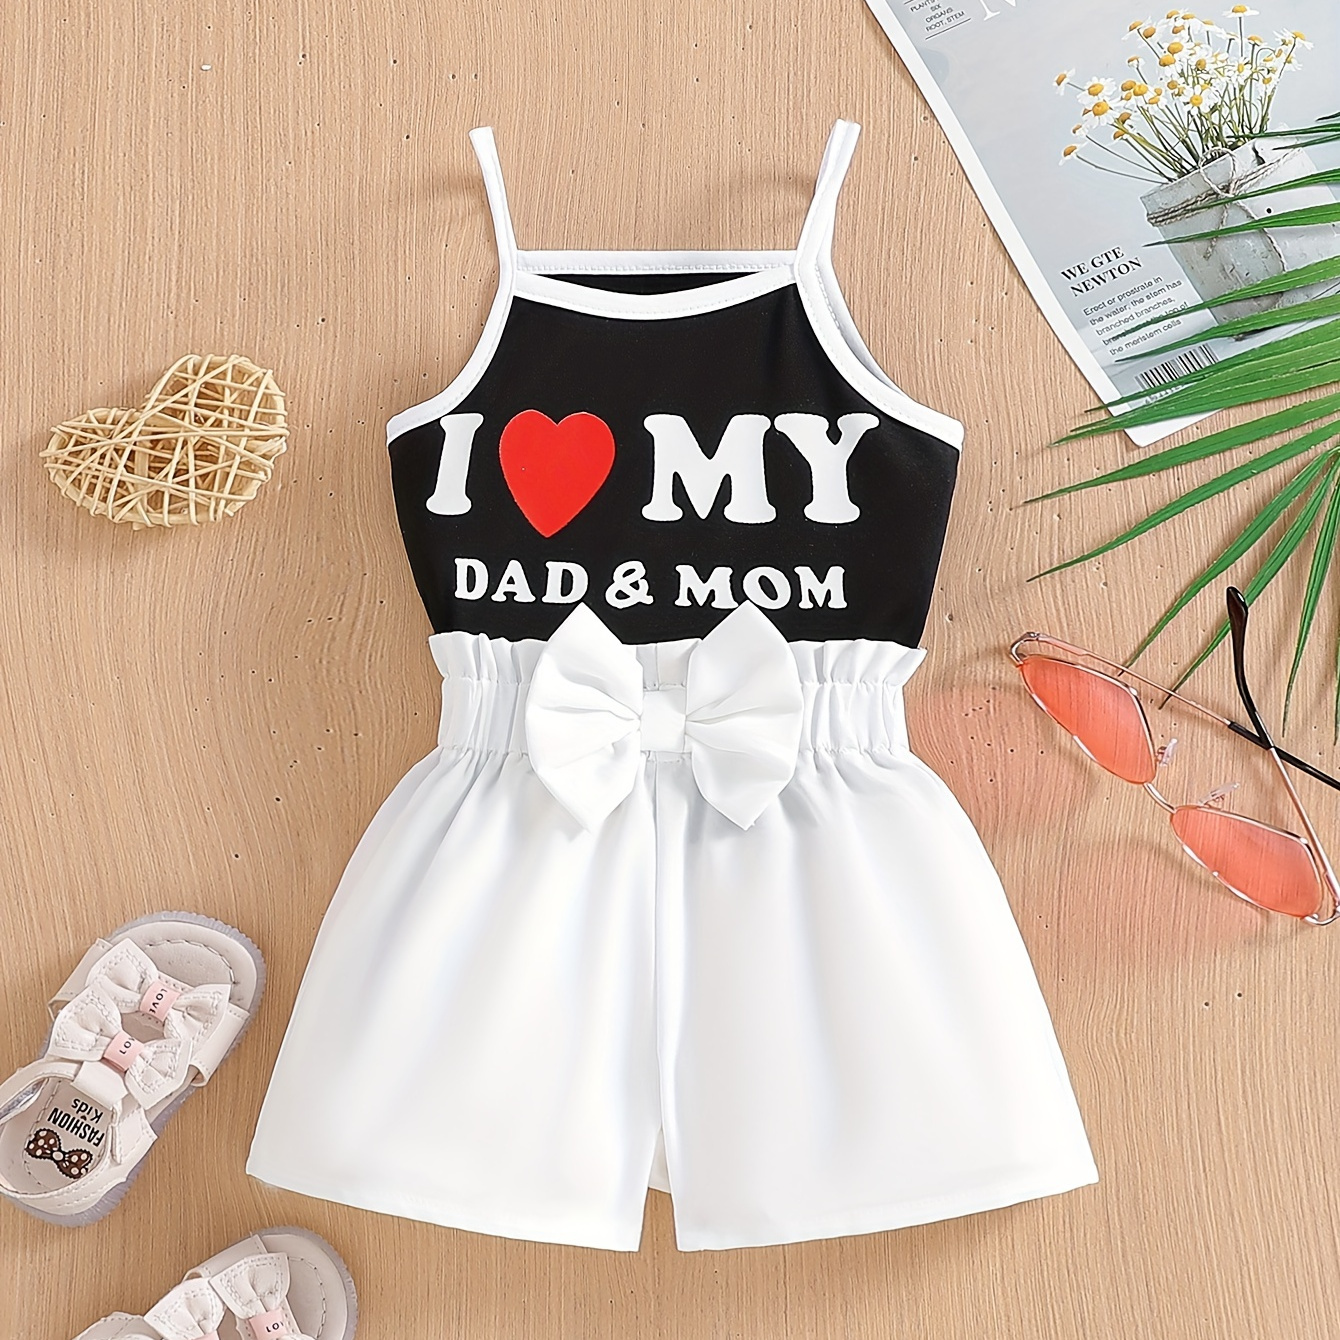 

Baby's "i Love My Dad & Mom" Print 2pcs Casual Summer Outfit, Cami Top & Bowknot Shorts Set, Toddler & Infant Girl's Clothes For Daily/holiday/party